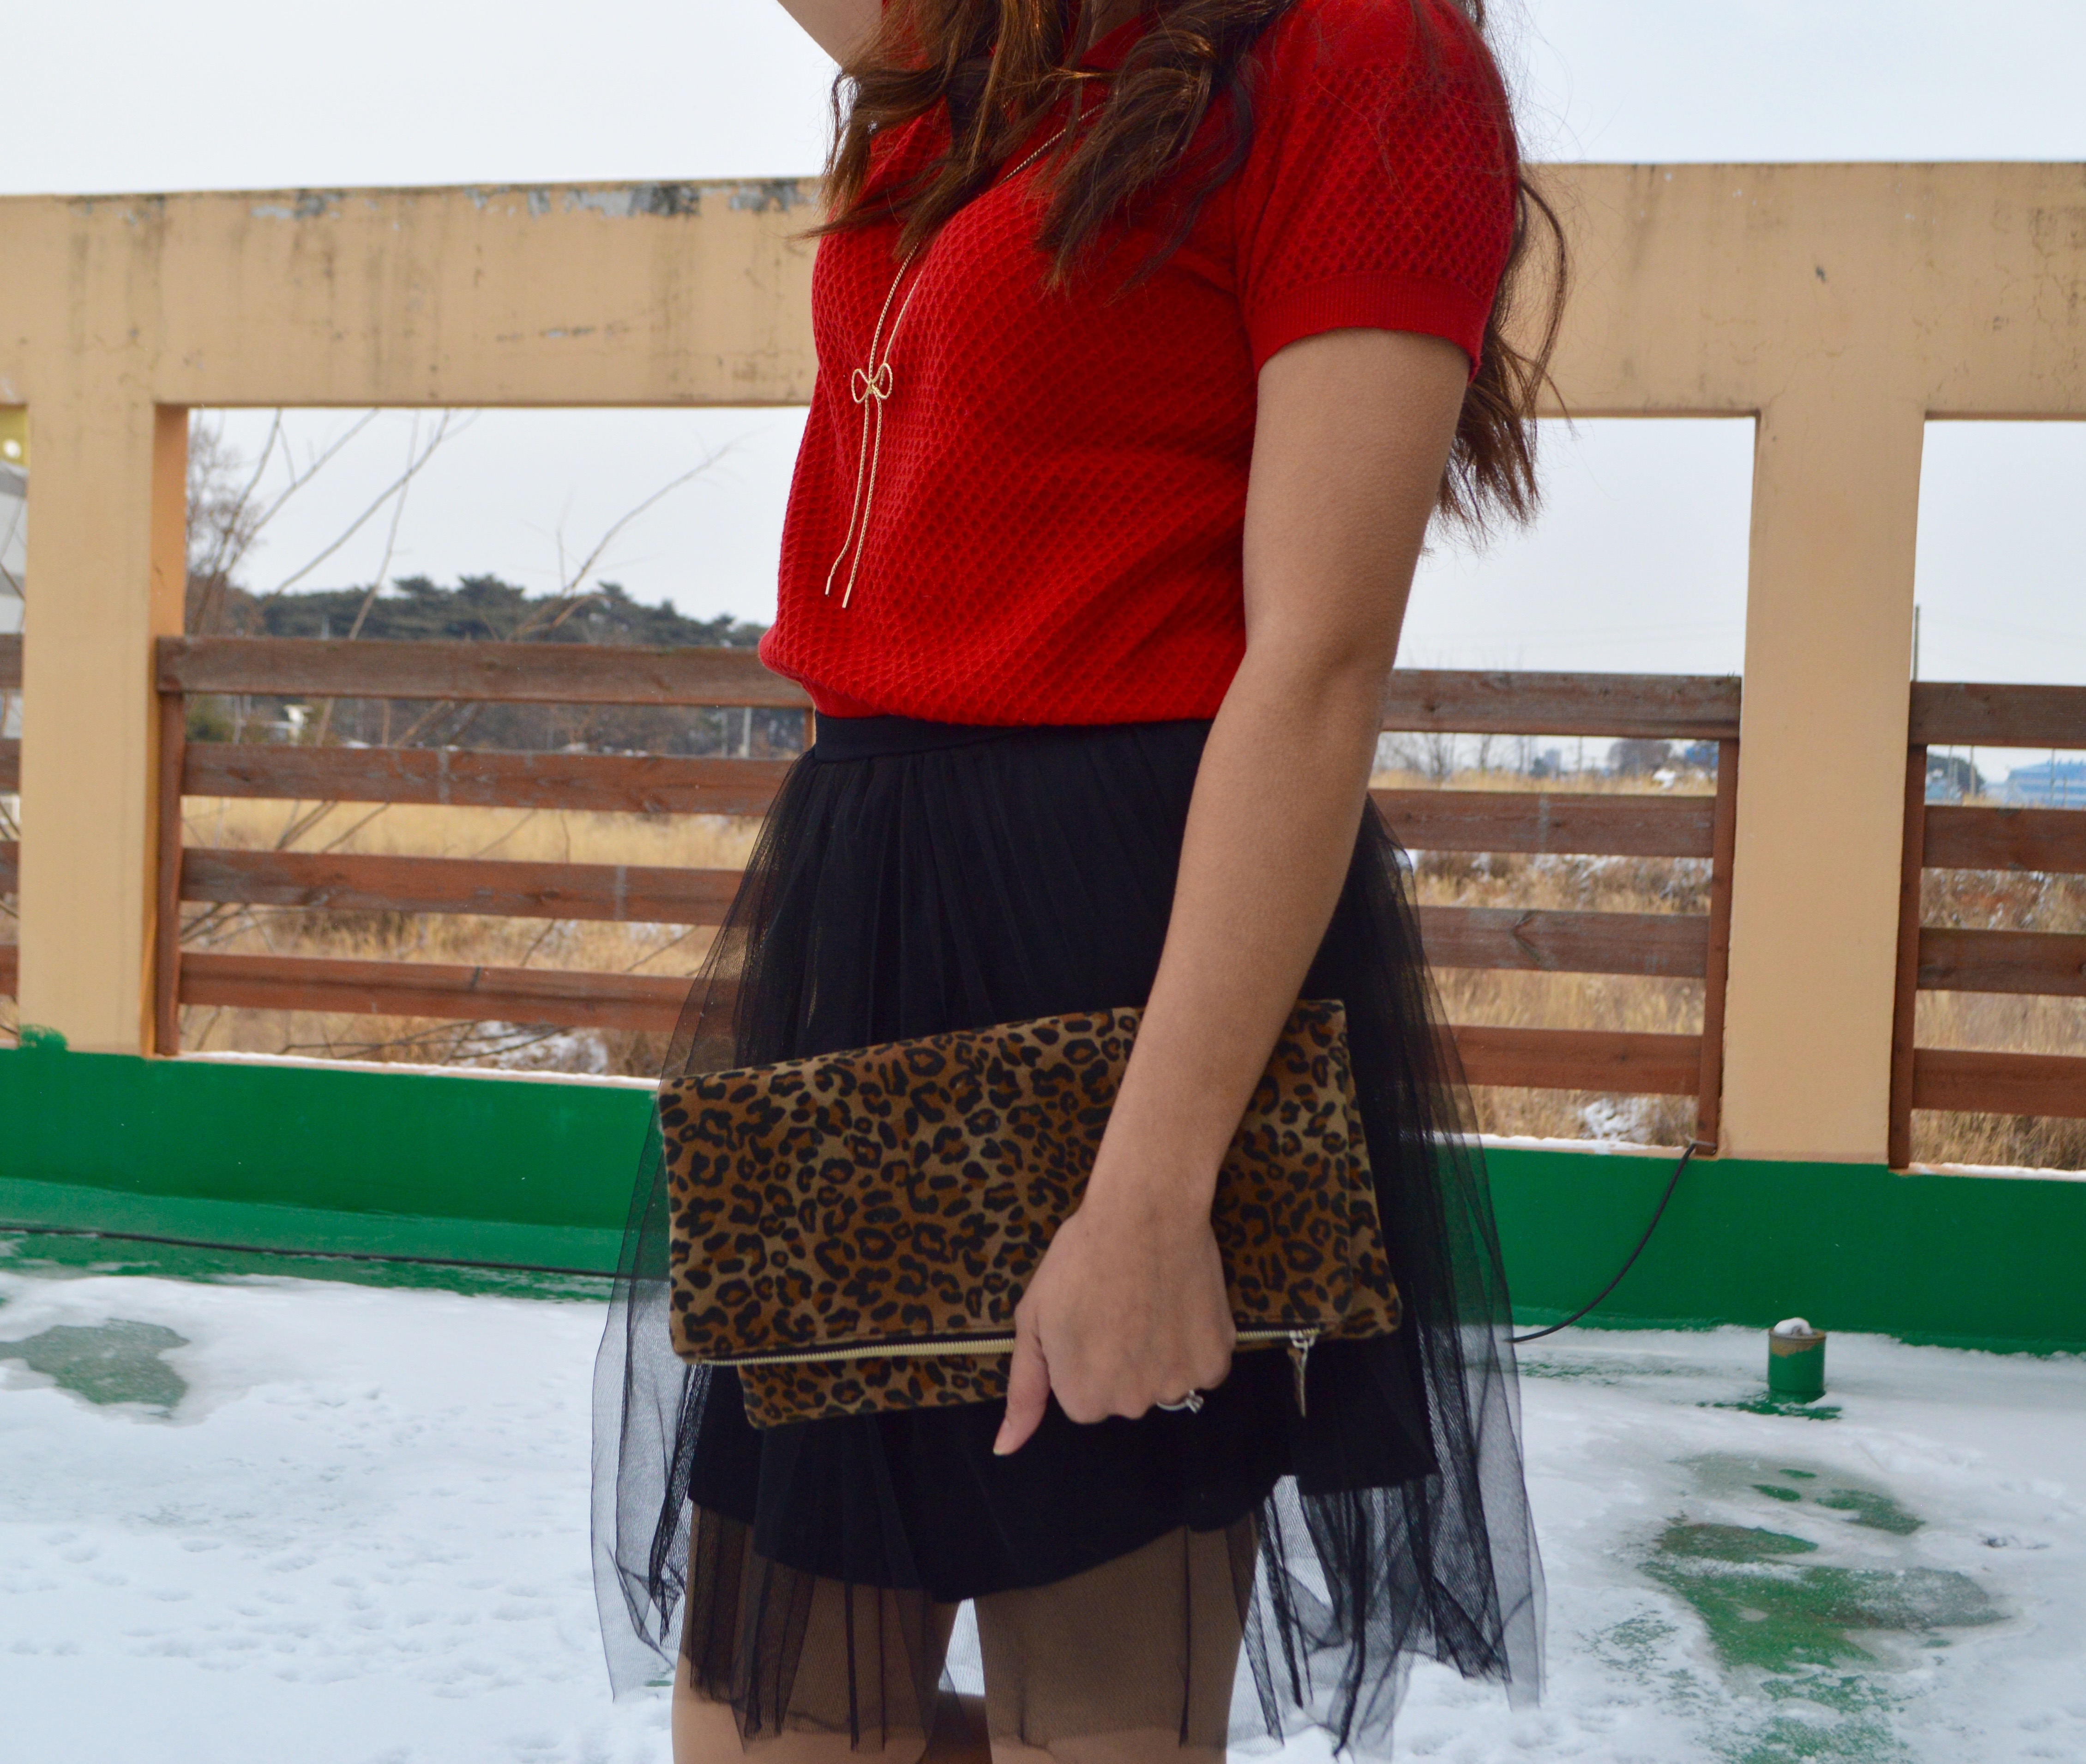 leopard, leopard clutch, clutch, fashion, what to wear, vday outfit, valentines outfit ideas, fashion blogging for beginners, how to blog about fashion, valentines inspiration, inspiration, tulle skirt, tulle earrings, tulle, mary jane heels, red heels, the perfect vday outfit, date night, girls night, how to blog, 